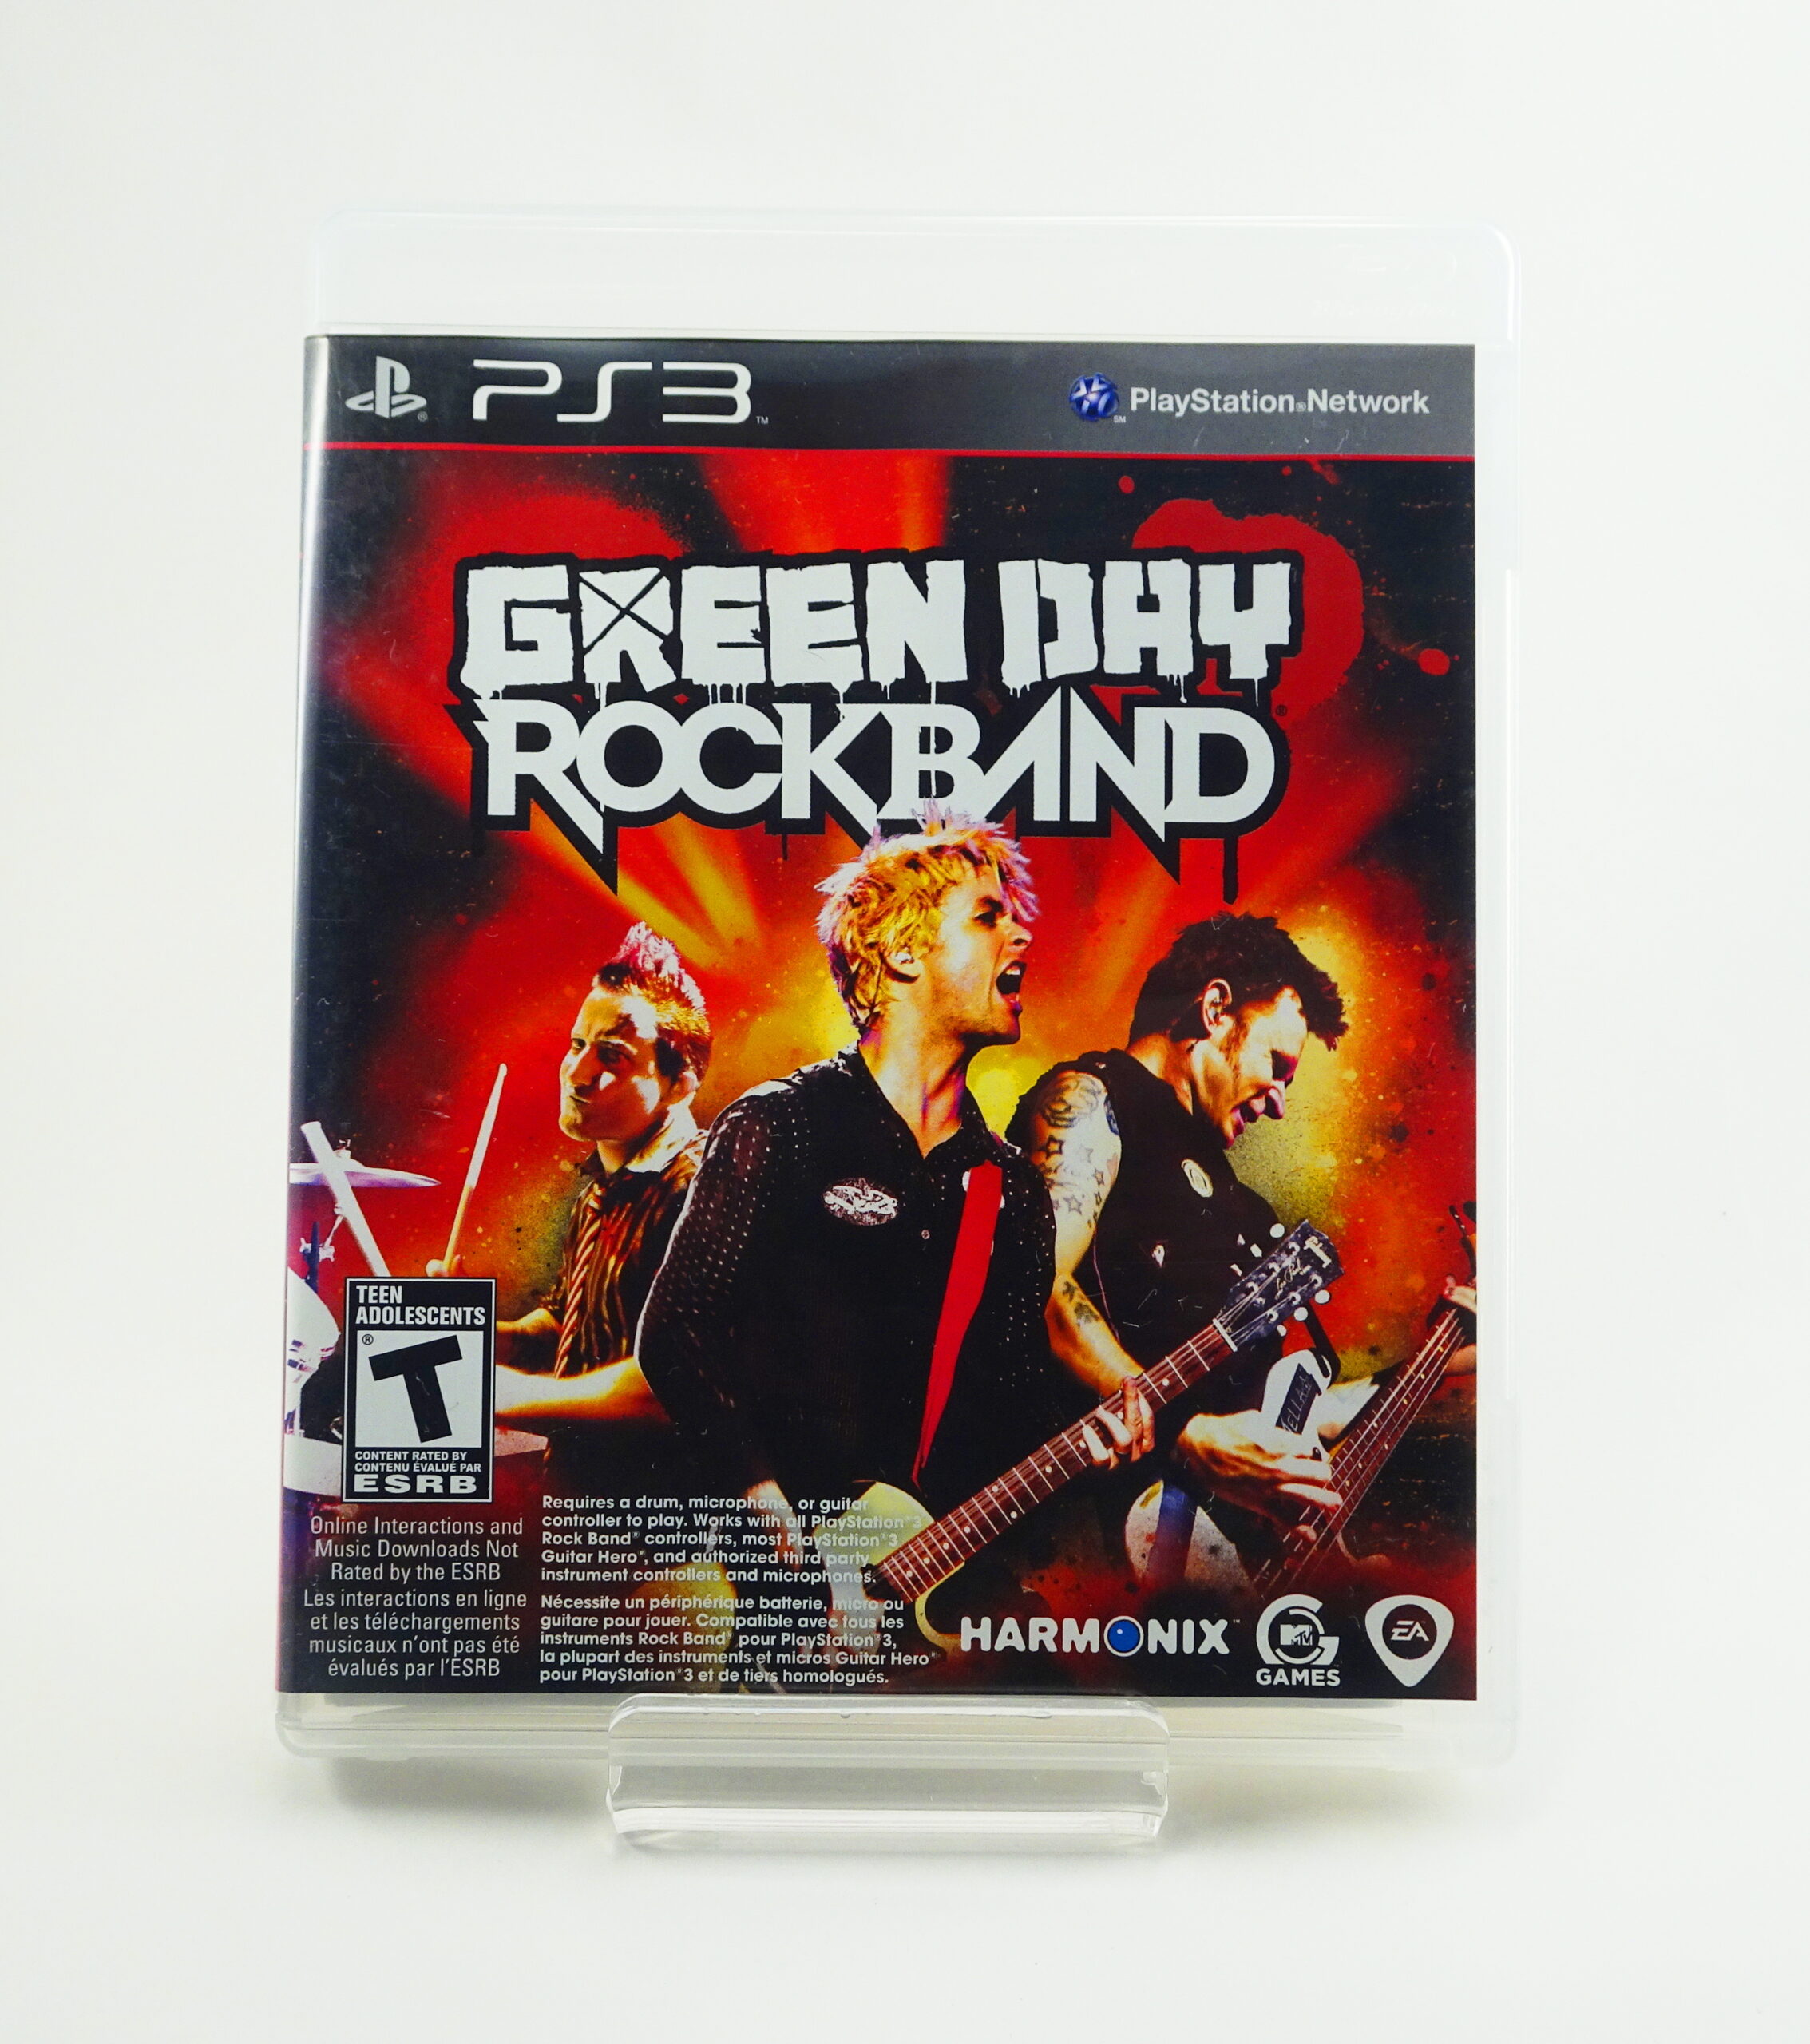 Green Day: Rock Band (PS3)